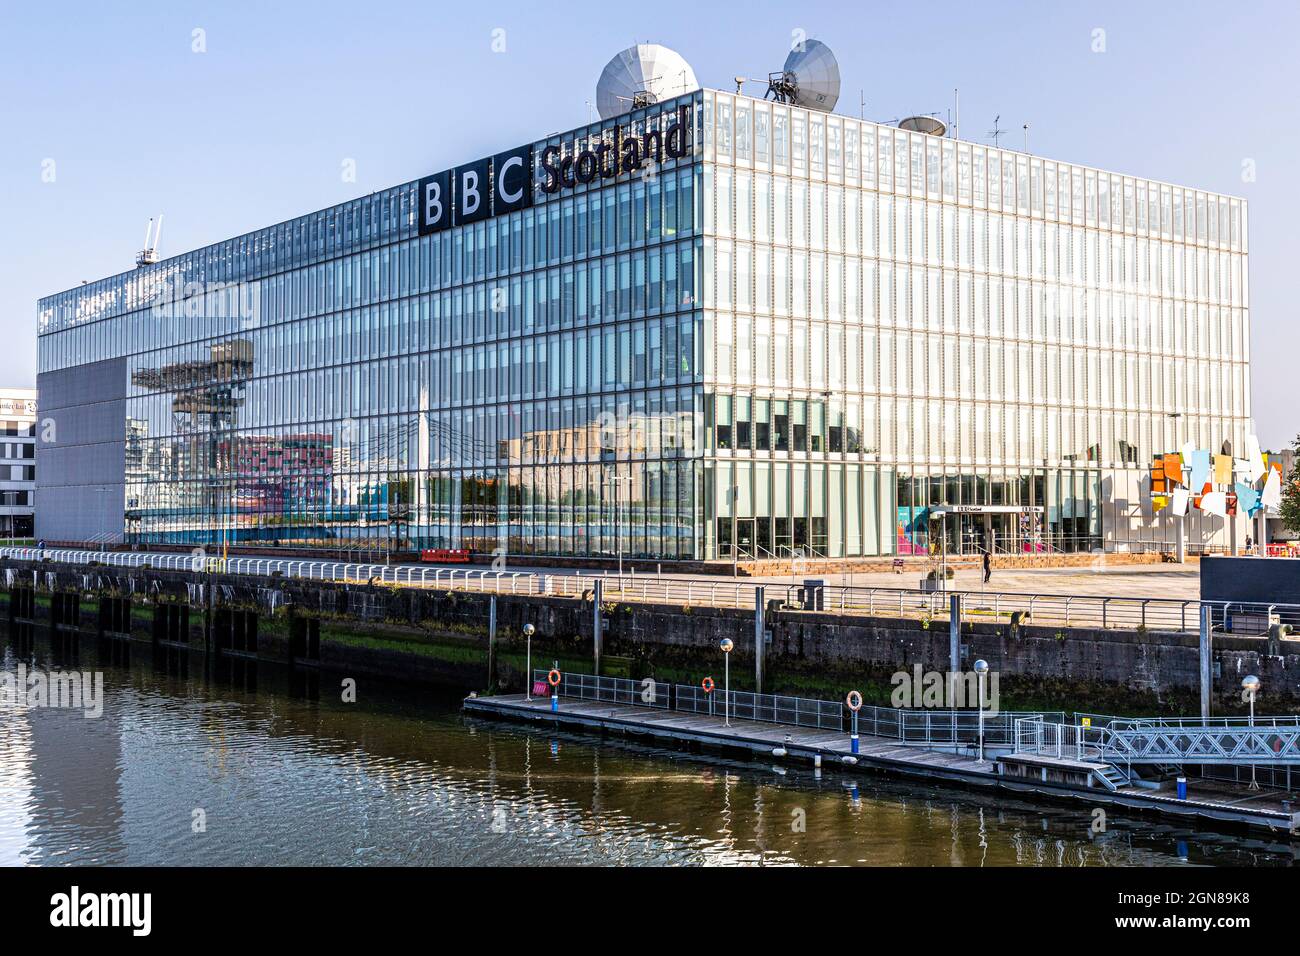 The BBC Scotland building beside Bells Bridge on the River Clyde in Glasgow, Scotland UK Stock Photo